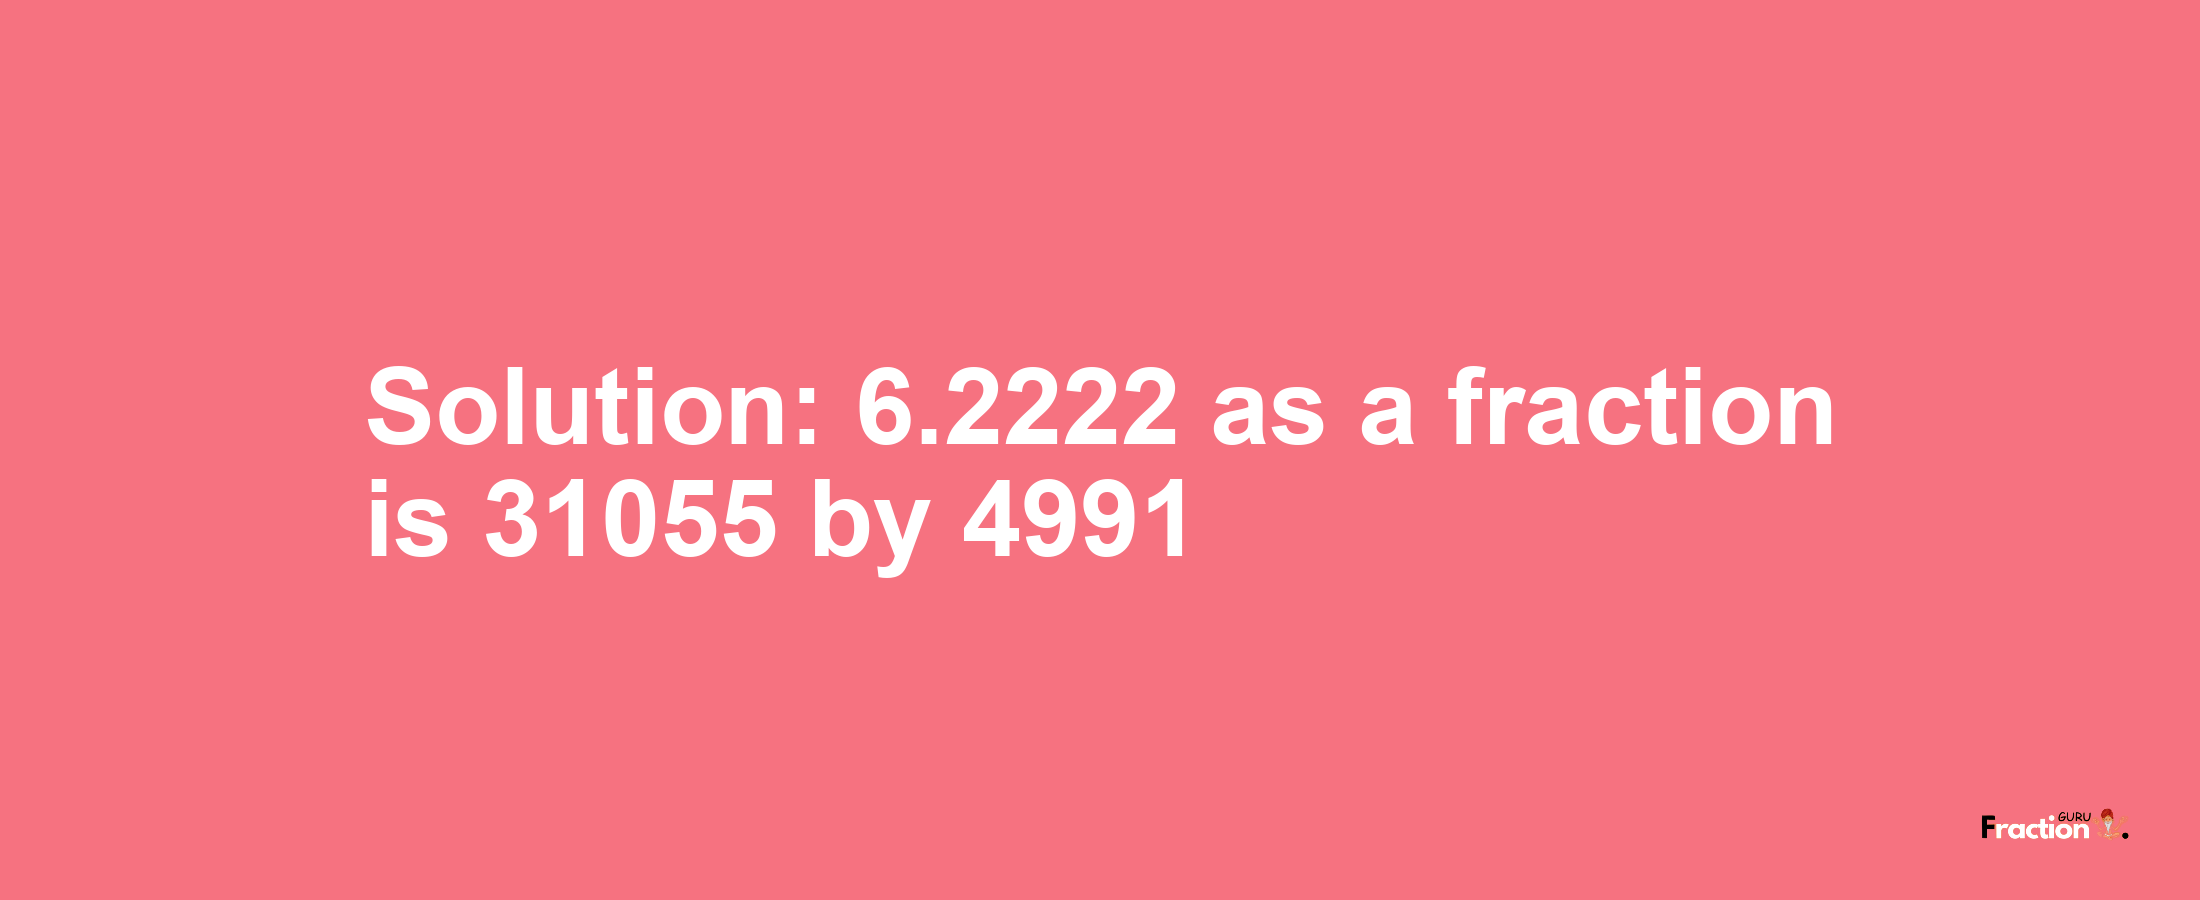 Solution:6.2222 as a fraction is 31055/4991